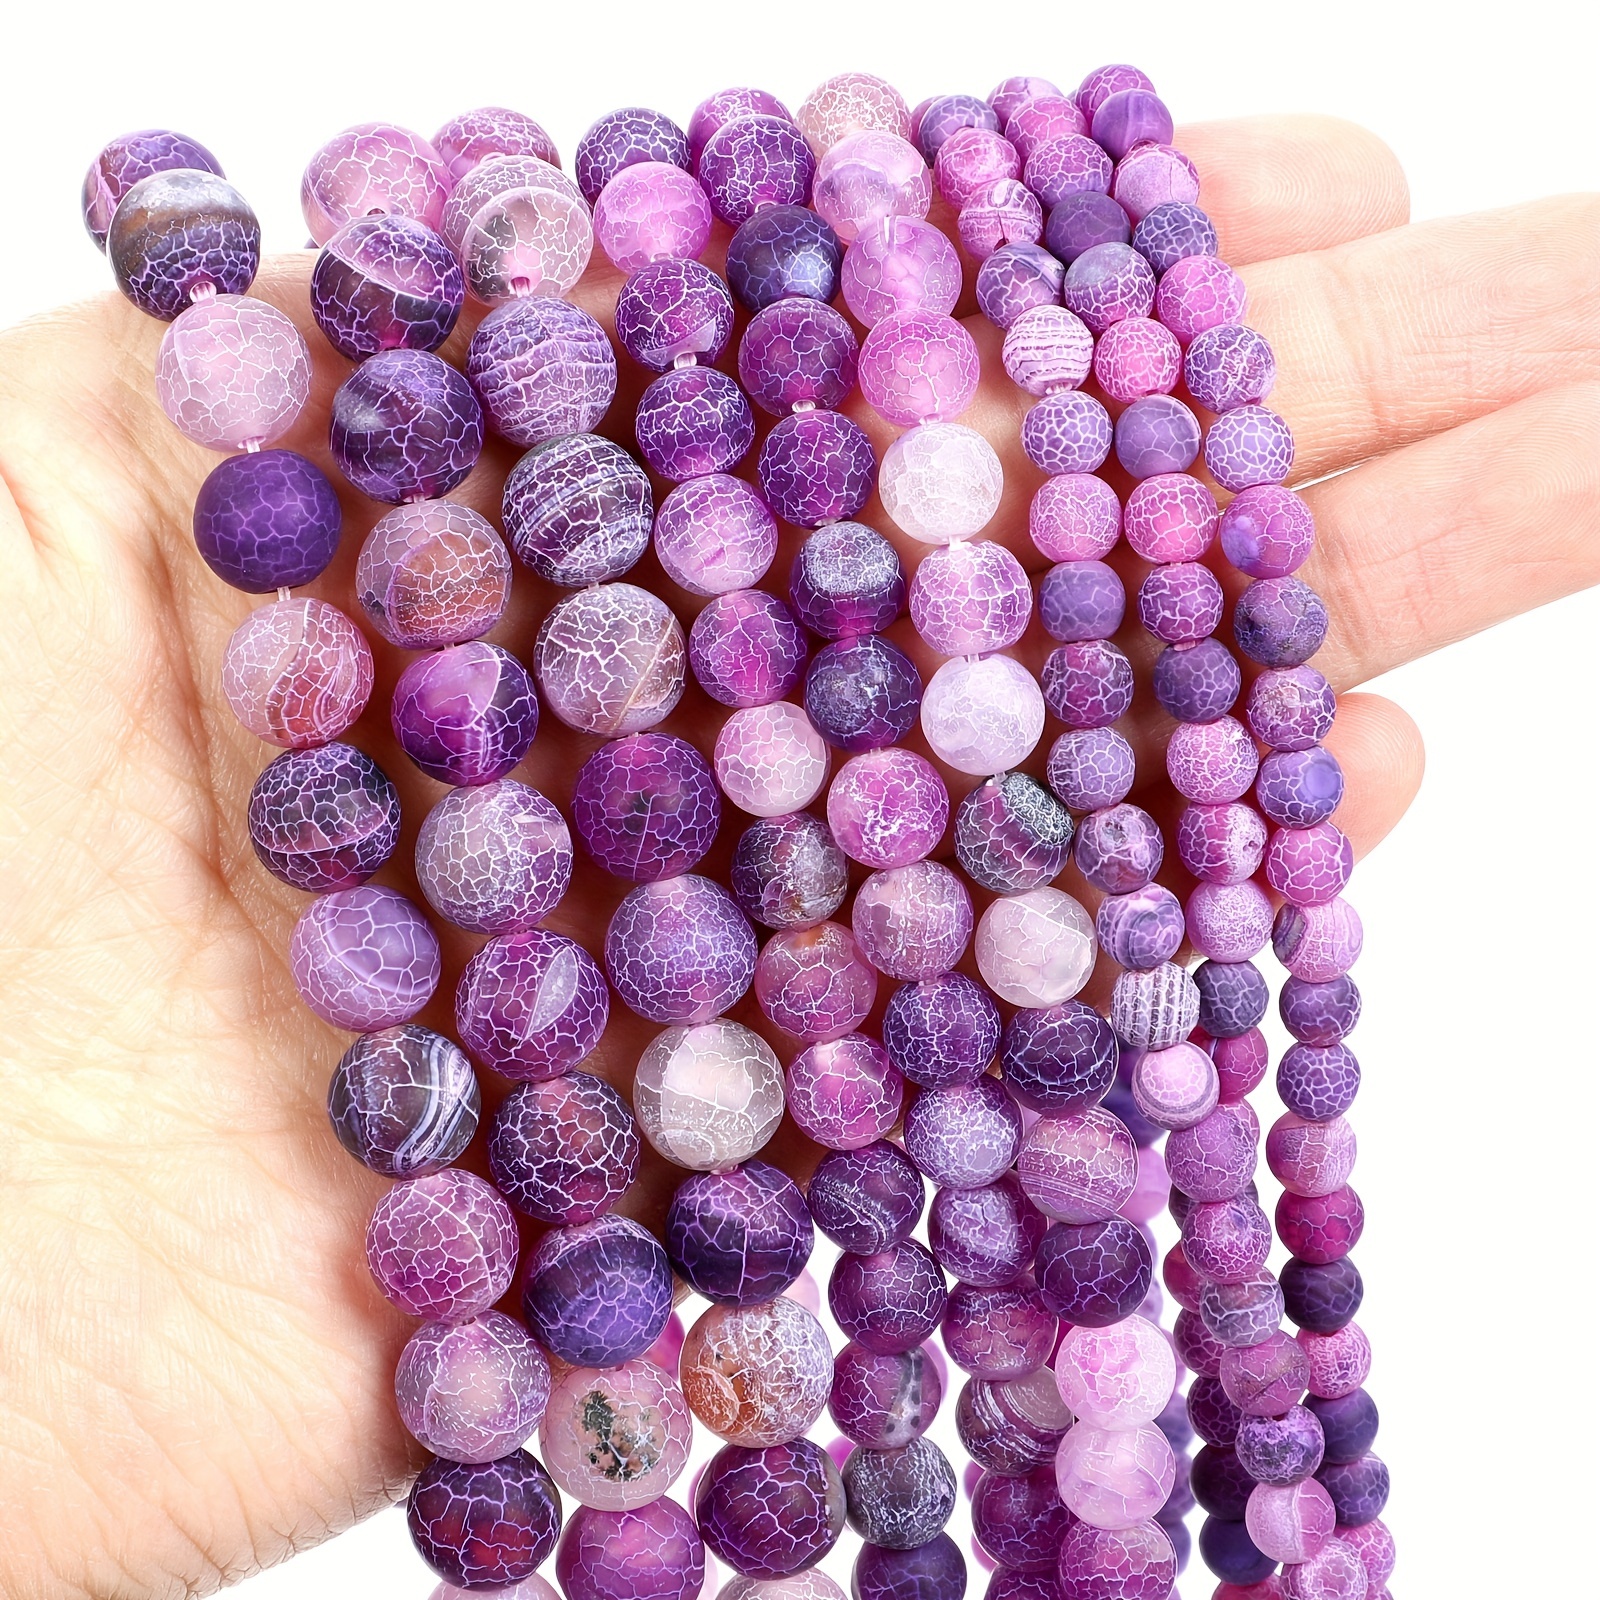 50Pcs Mixed Assorted Beads For Jewelry Making Mix Crystal Glass Round Beads  Acrylic Beads Pearl Beads Pony Beads Spacer Beads For DIY Crafts, With  Lobster Claw Clasps And Chain Extender